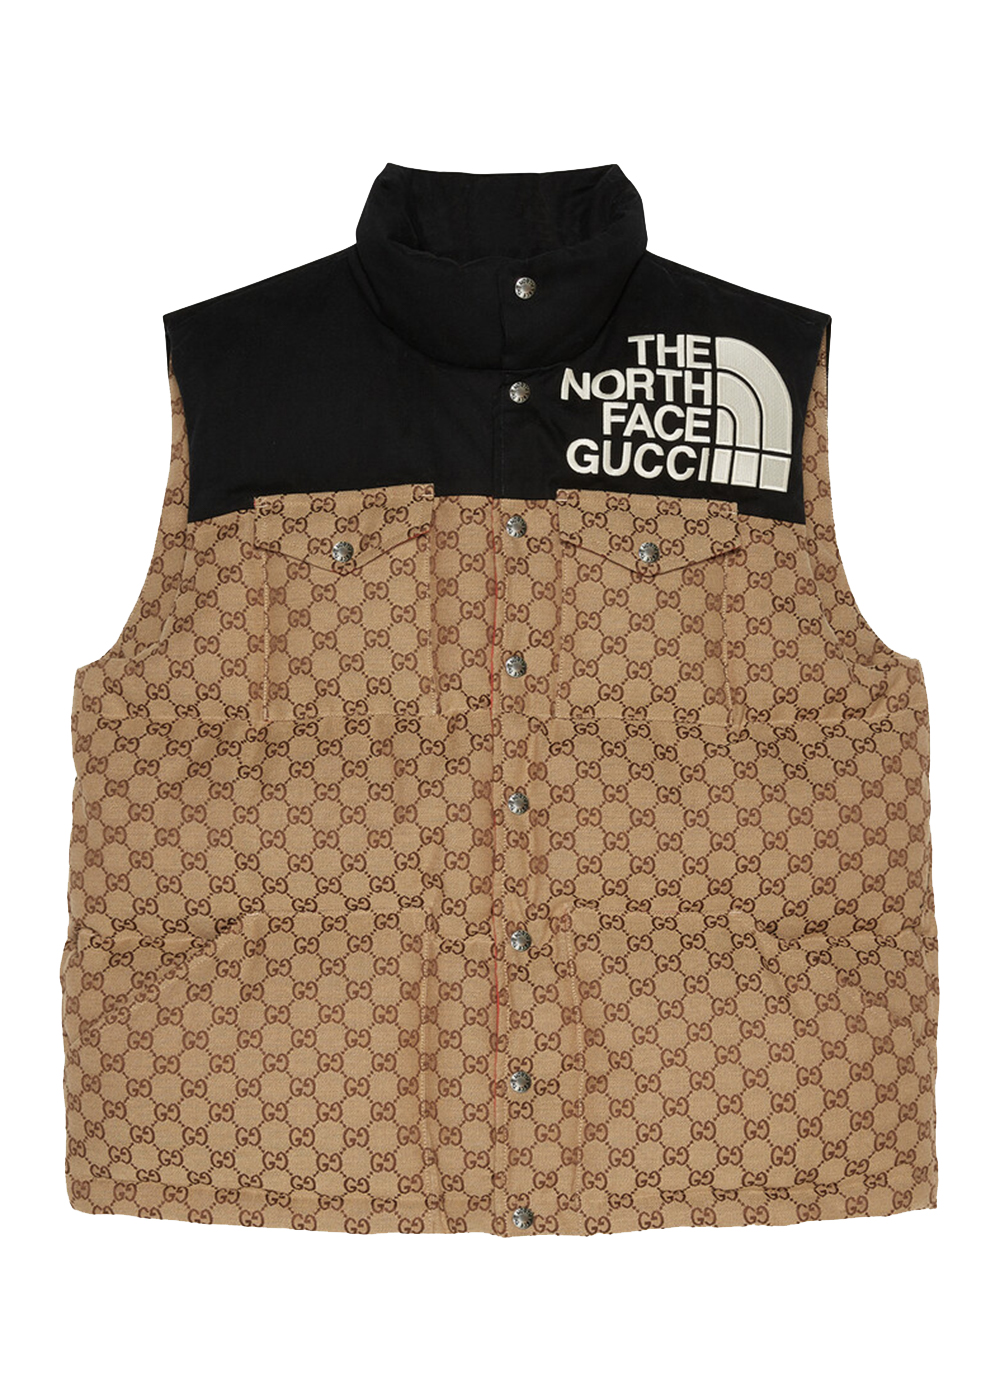 Gucci x The North Face Padded Vest Forest Print - FW21 - US